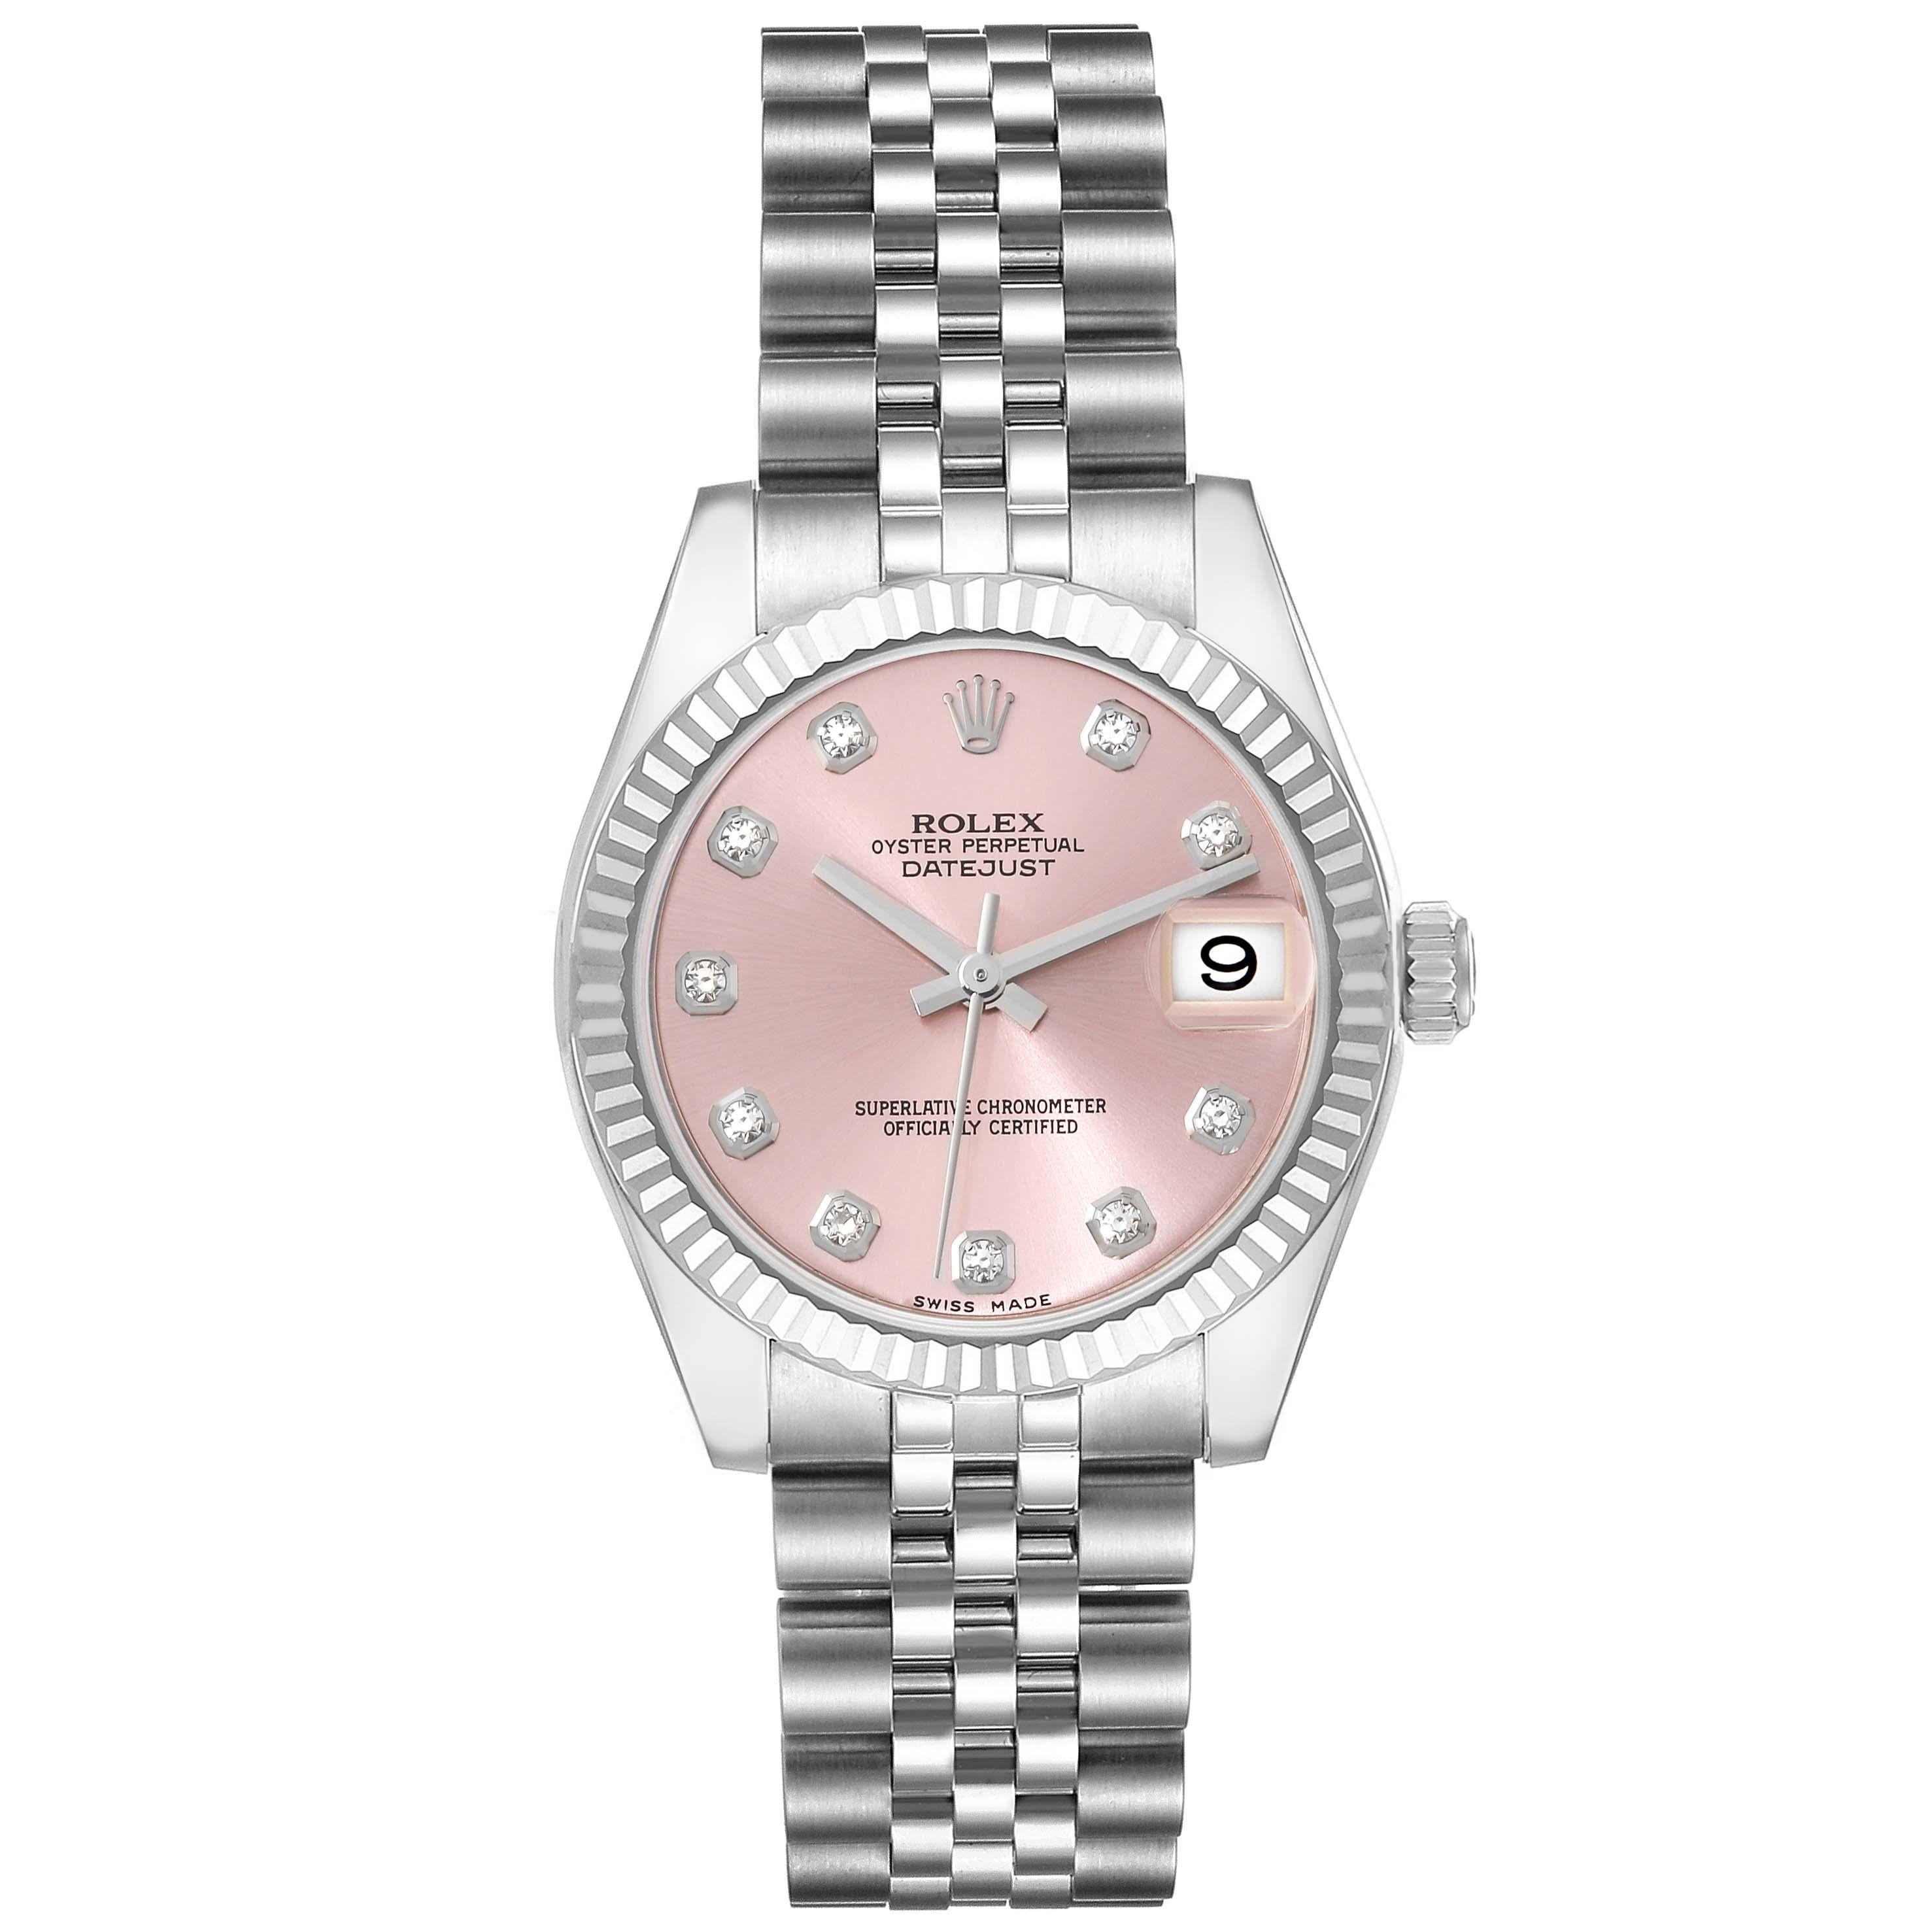 Rolex Datejust Midsize Steel White Gold Pink Diamond Dial Ladies Watch 178274. Officially certified chronometer automatic self-winding movement. Stainless steel oyster case 31.0 mm in diameter. Rolex logo on a crown. 18k white gold fluted bezel.